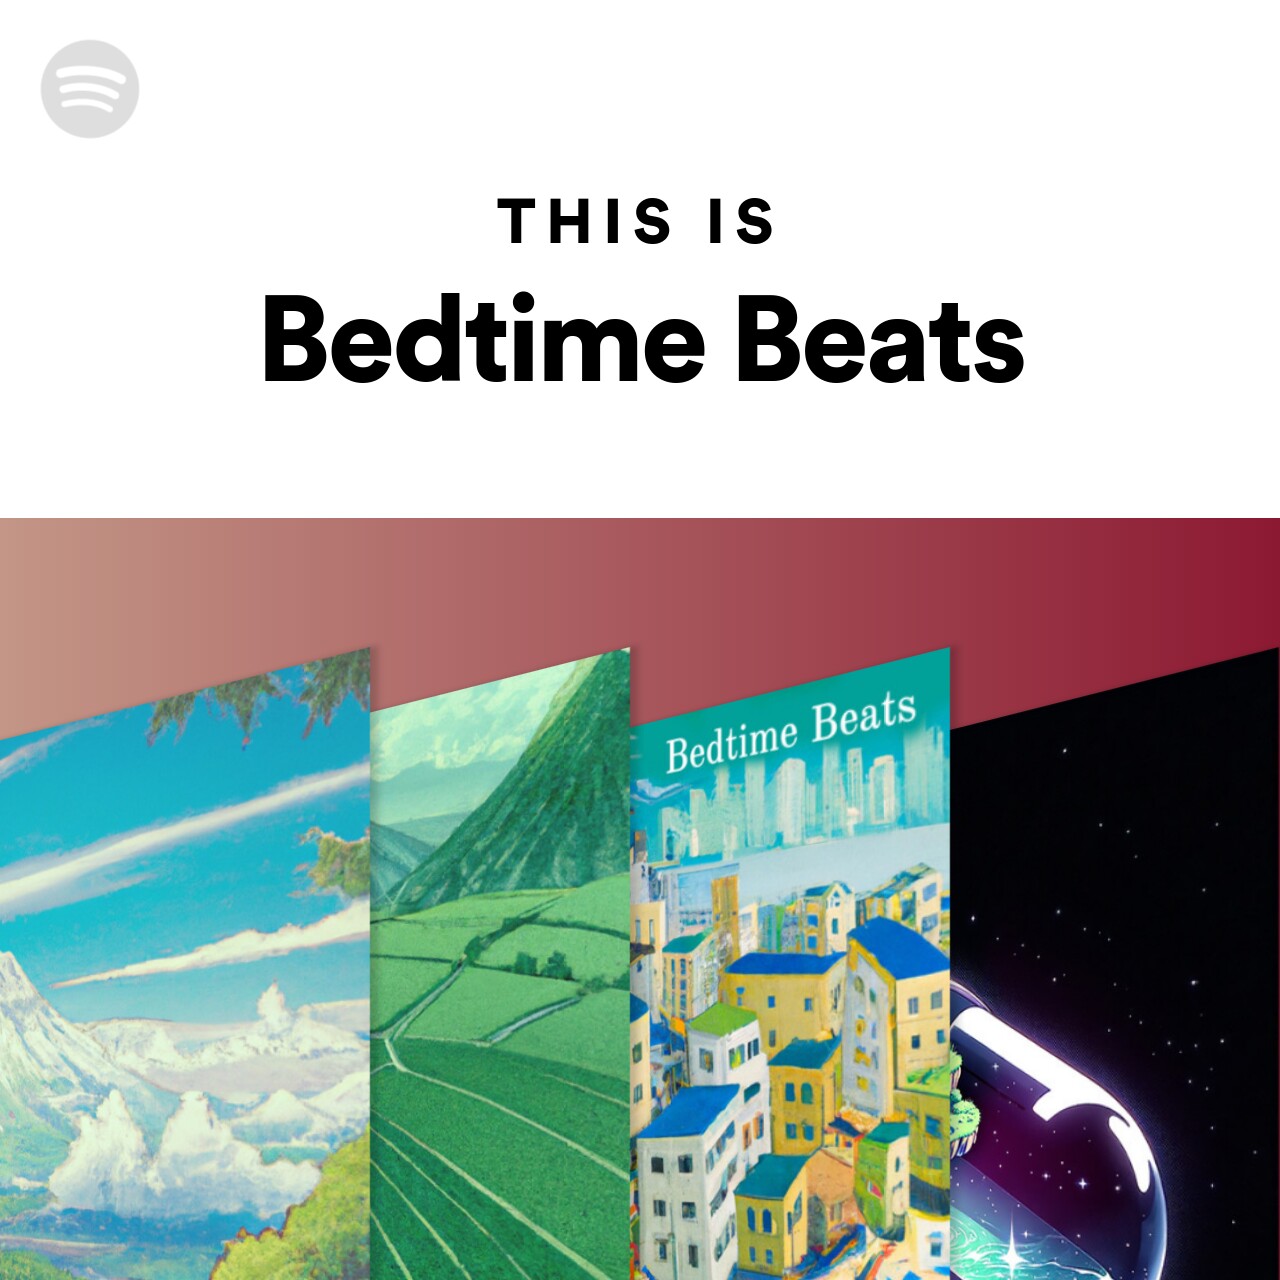 This Is Bedtime Beats